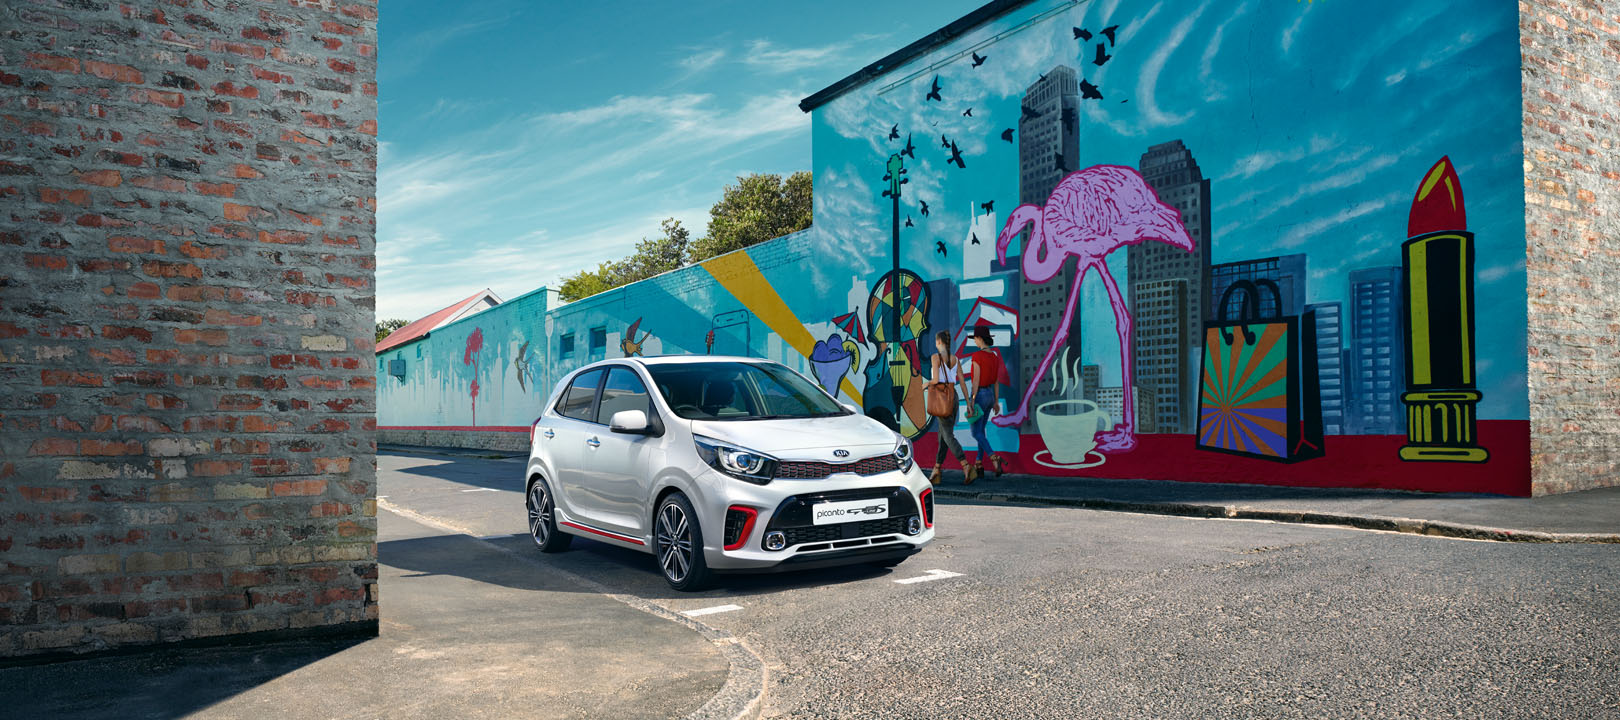 The Kia Picanto 2020 - Todds of Campsie : Todds of Campsie